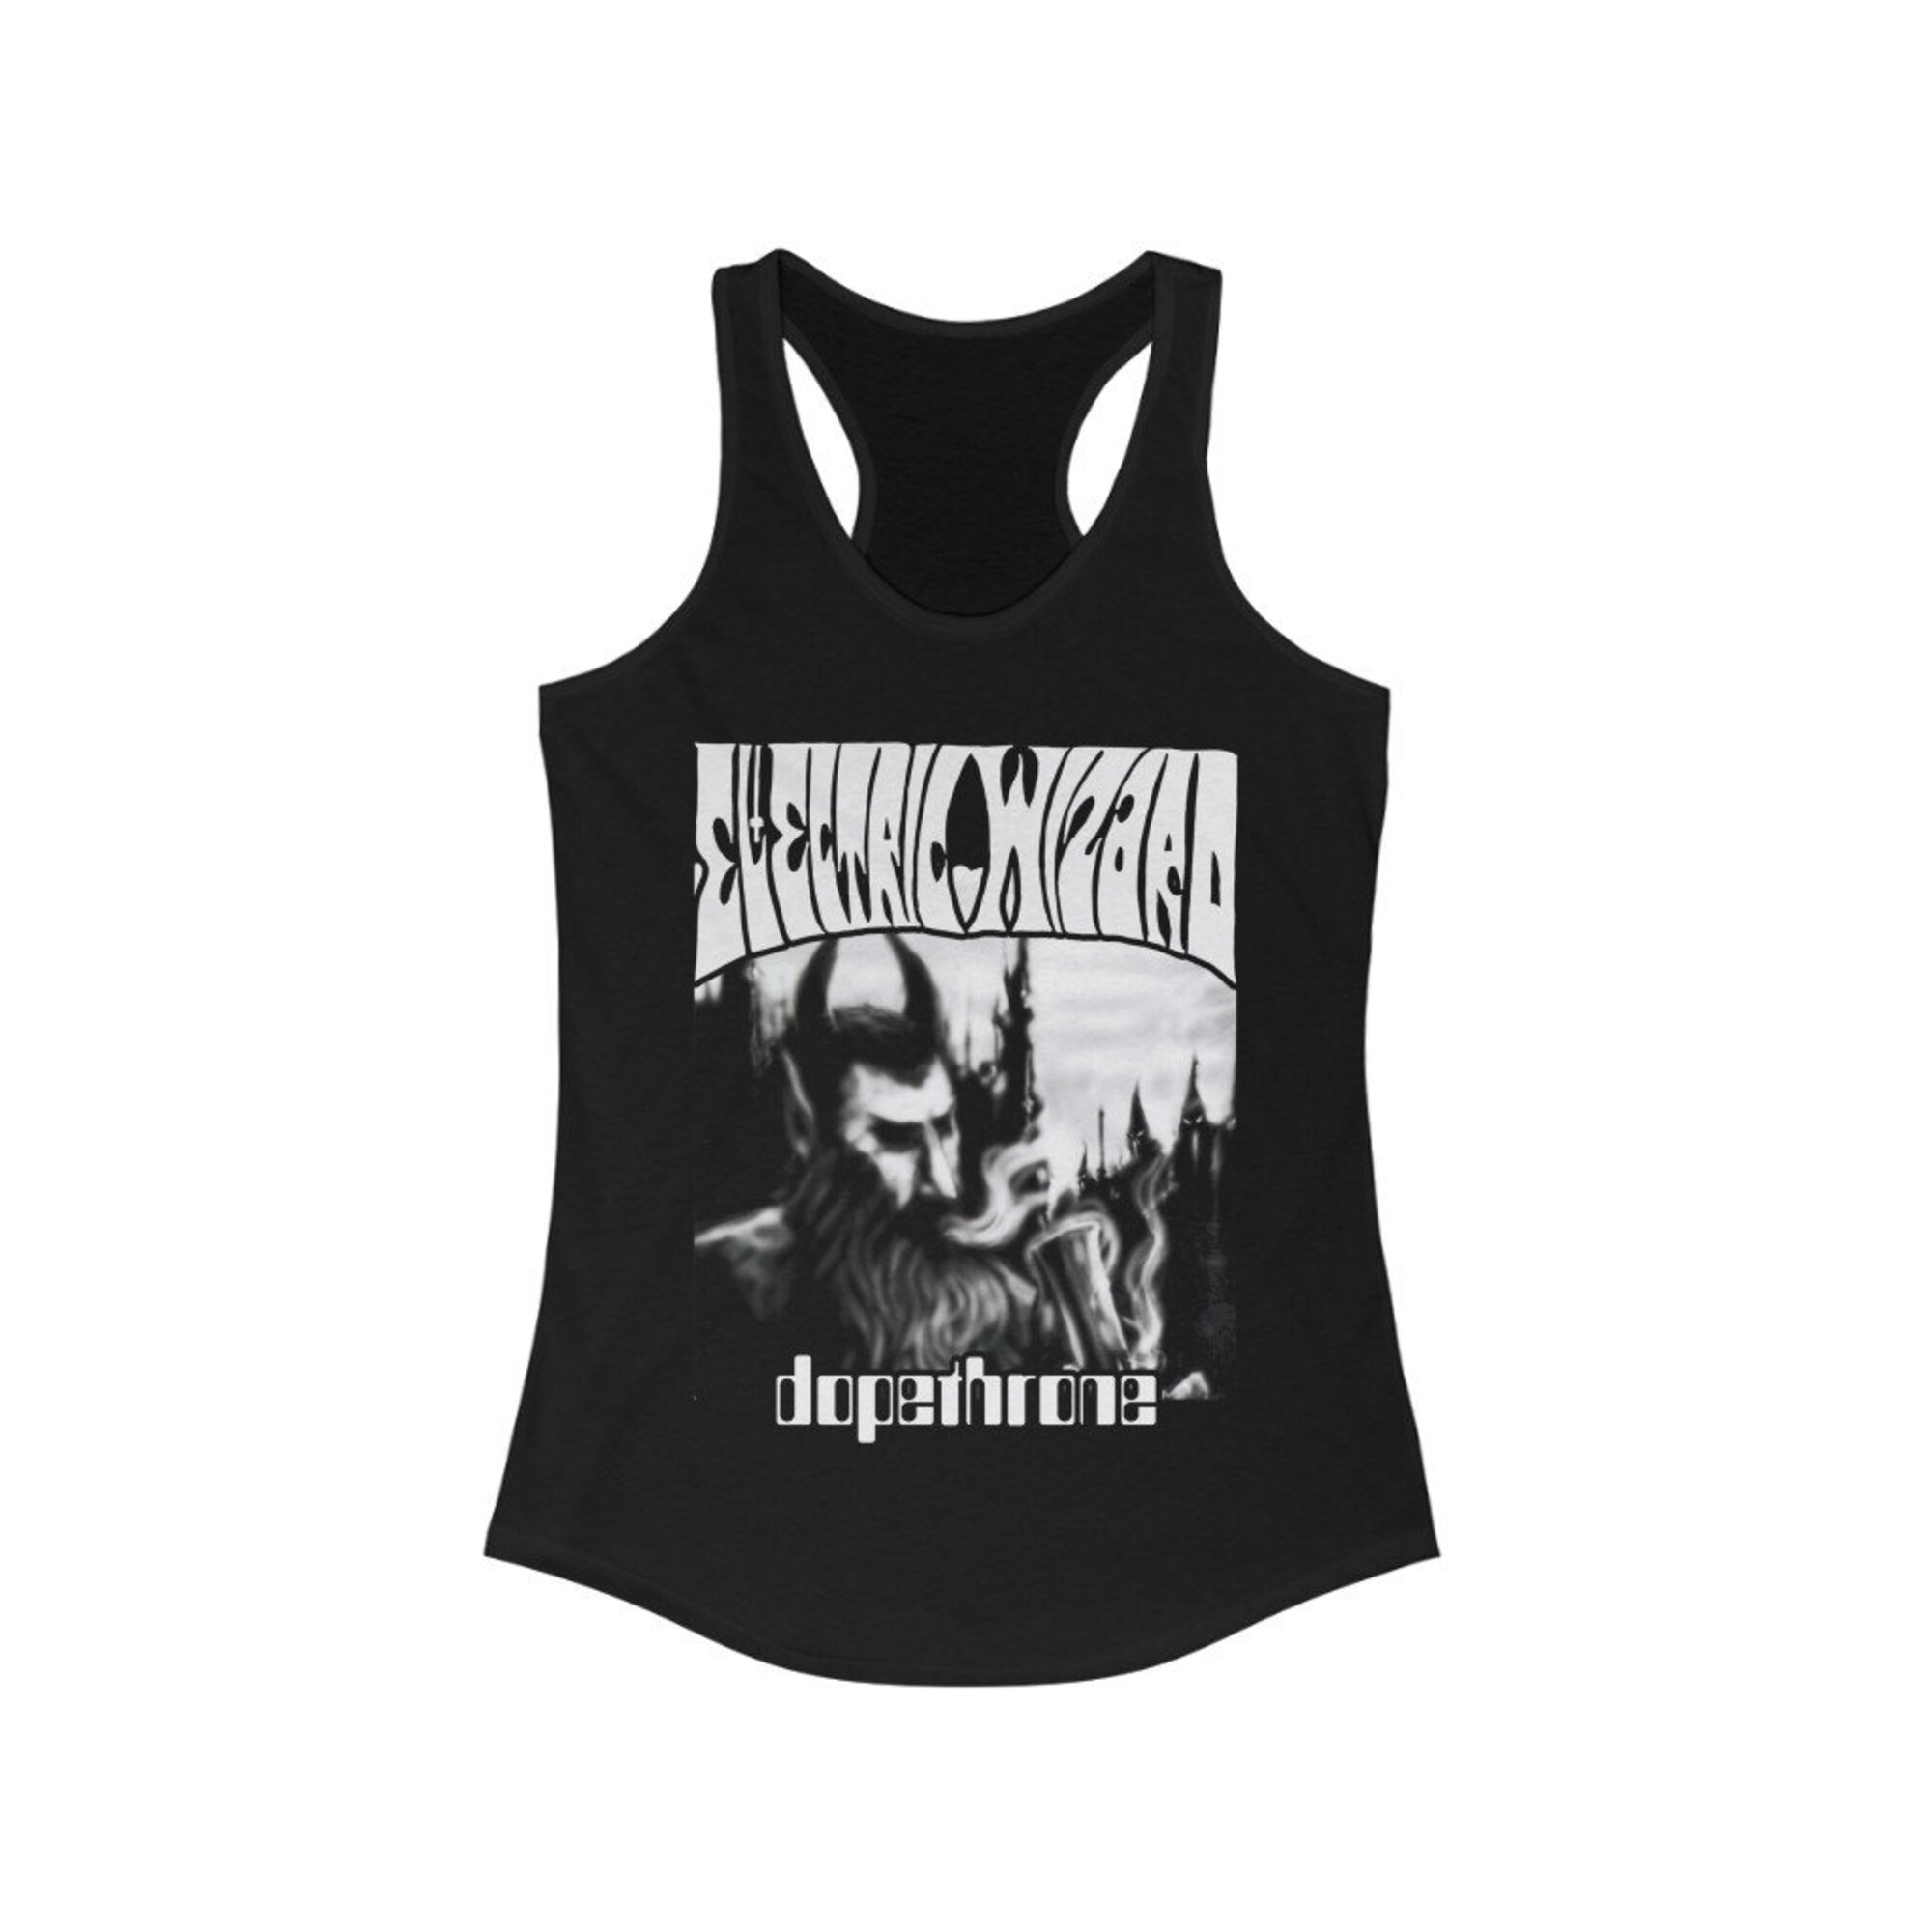 Discover Electric Wizard Womens Tank Top, Electric Wizard - Dopethrone, Electric Wizard Sleeveless Tee